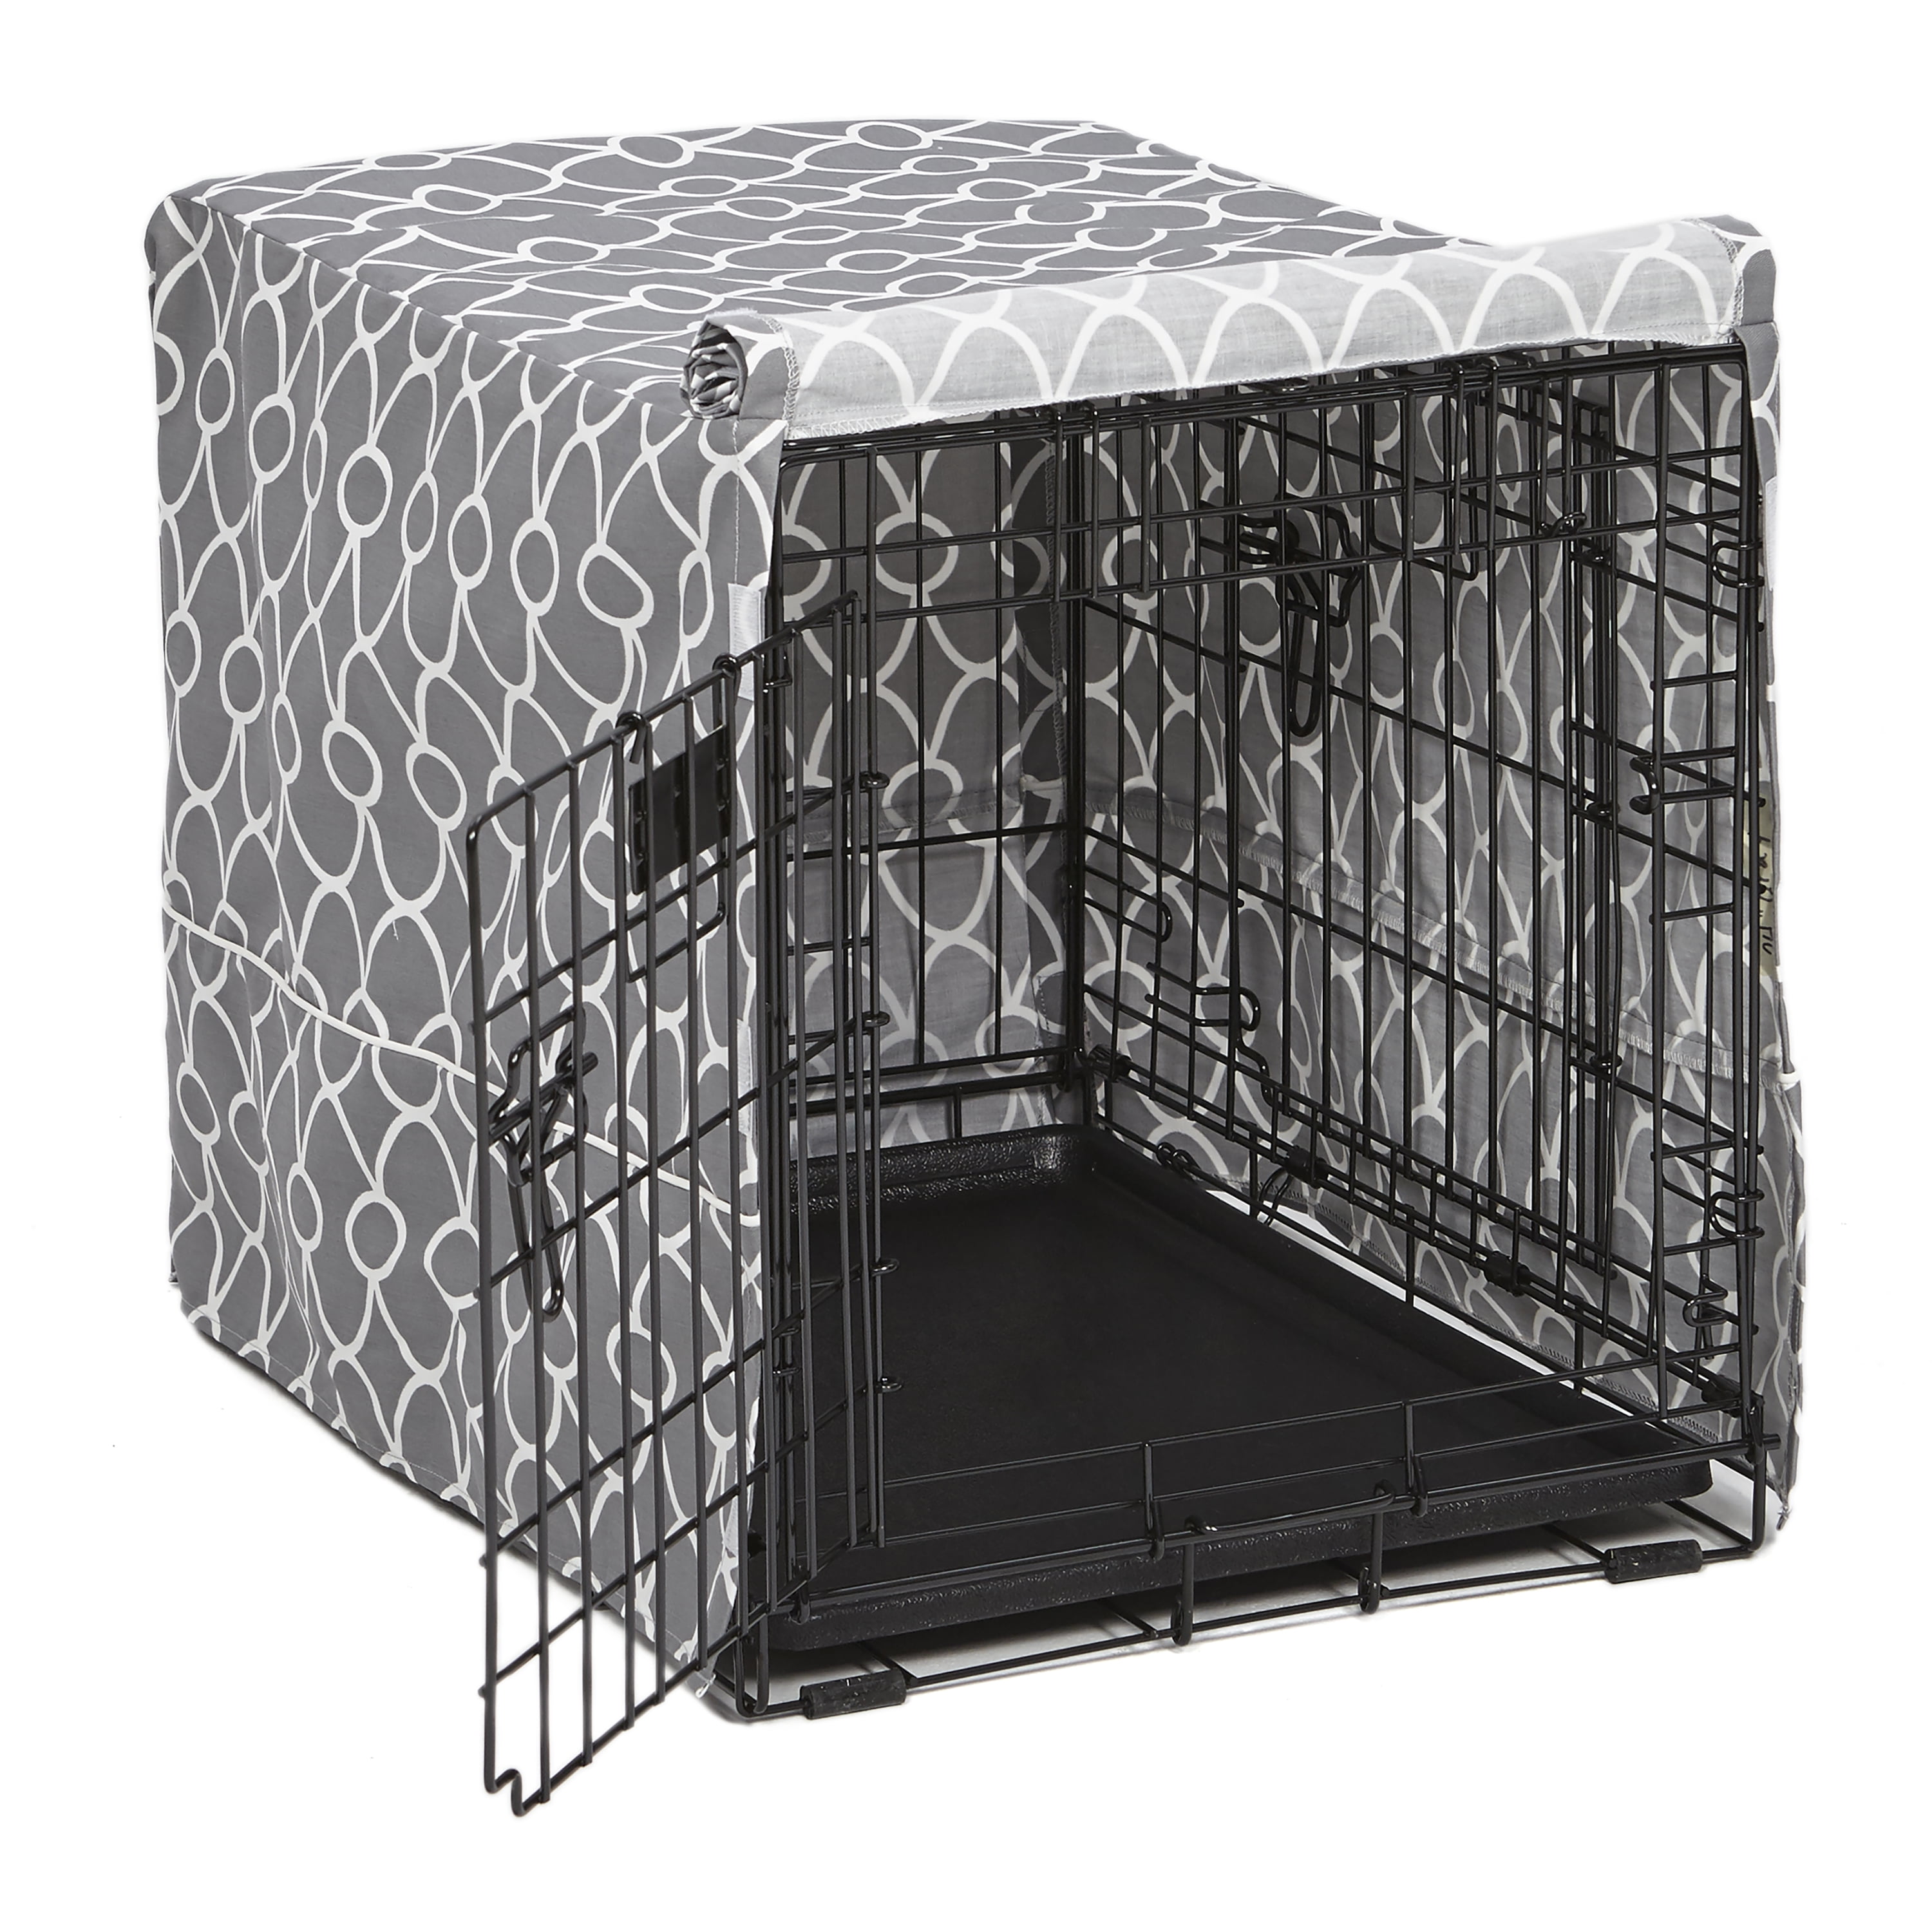 waterproof dog kennel cover